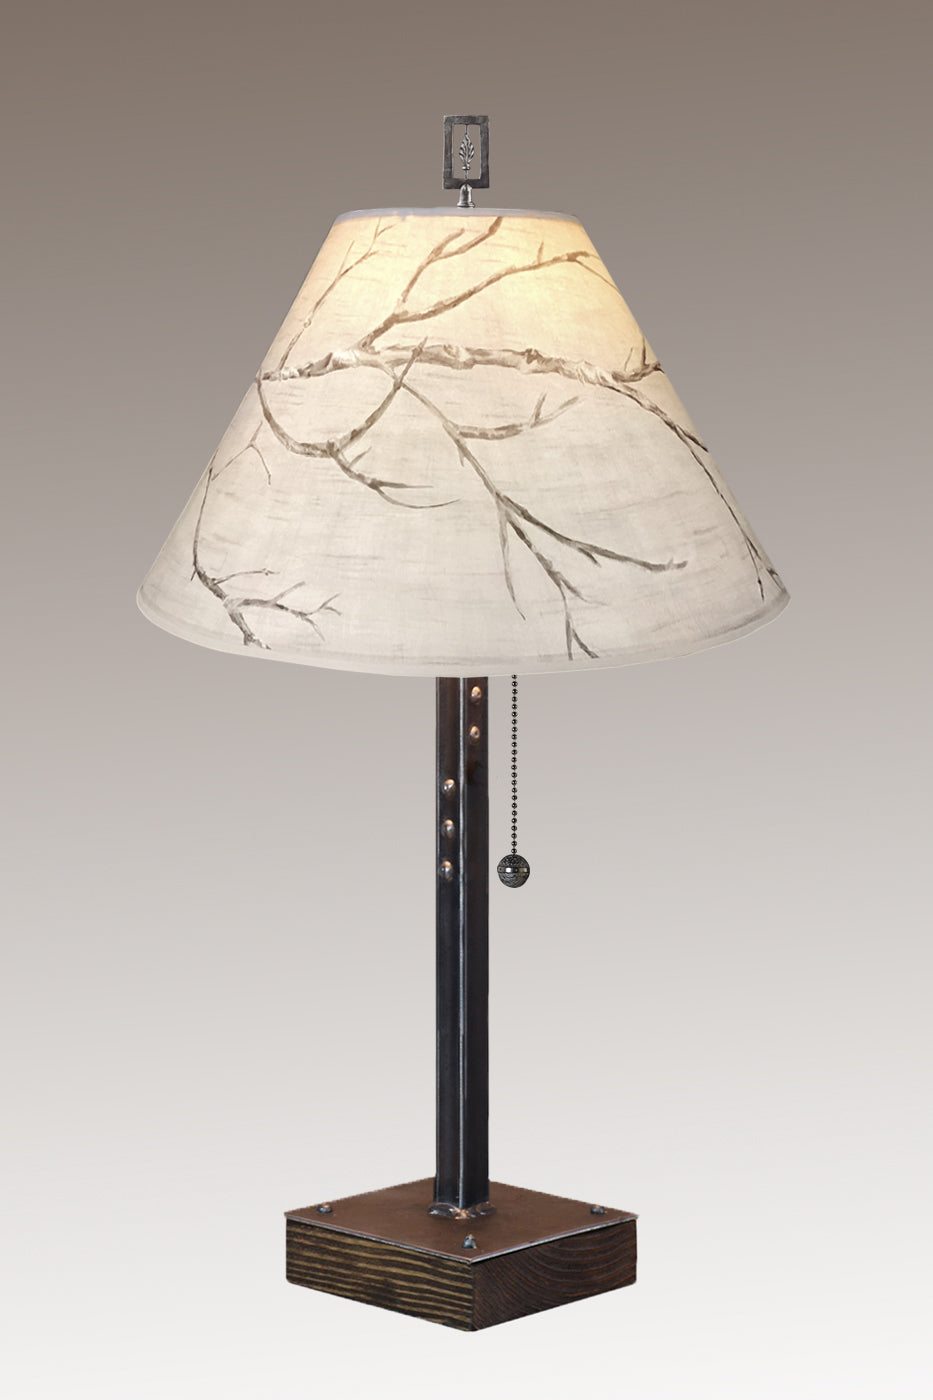 Janna Ugone & Co Table Lamps Steel Table Lamp on Wood with Medium Conical Shade in Sweeping Branch